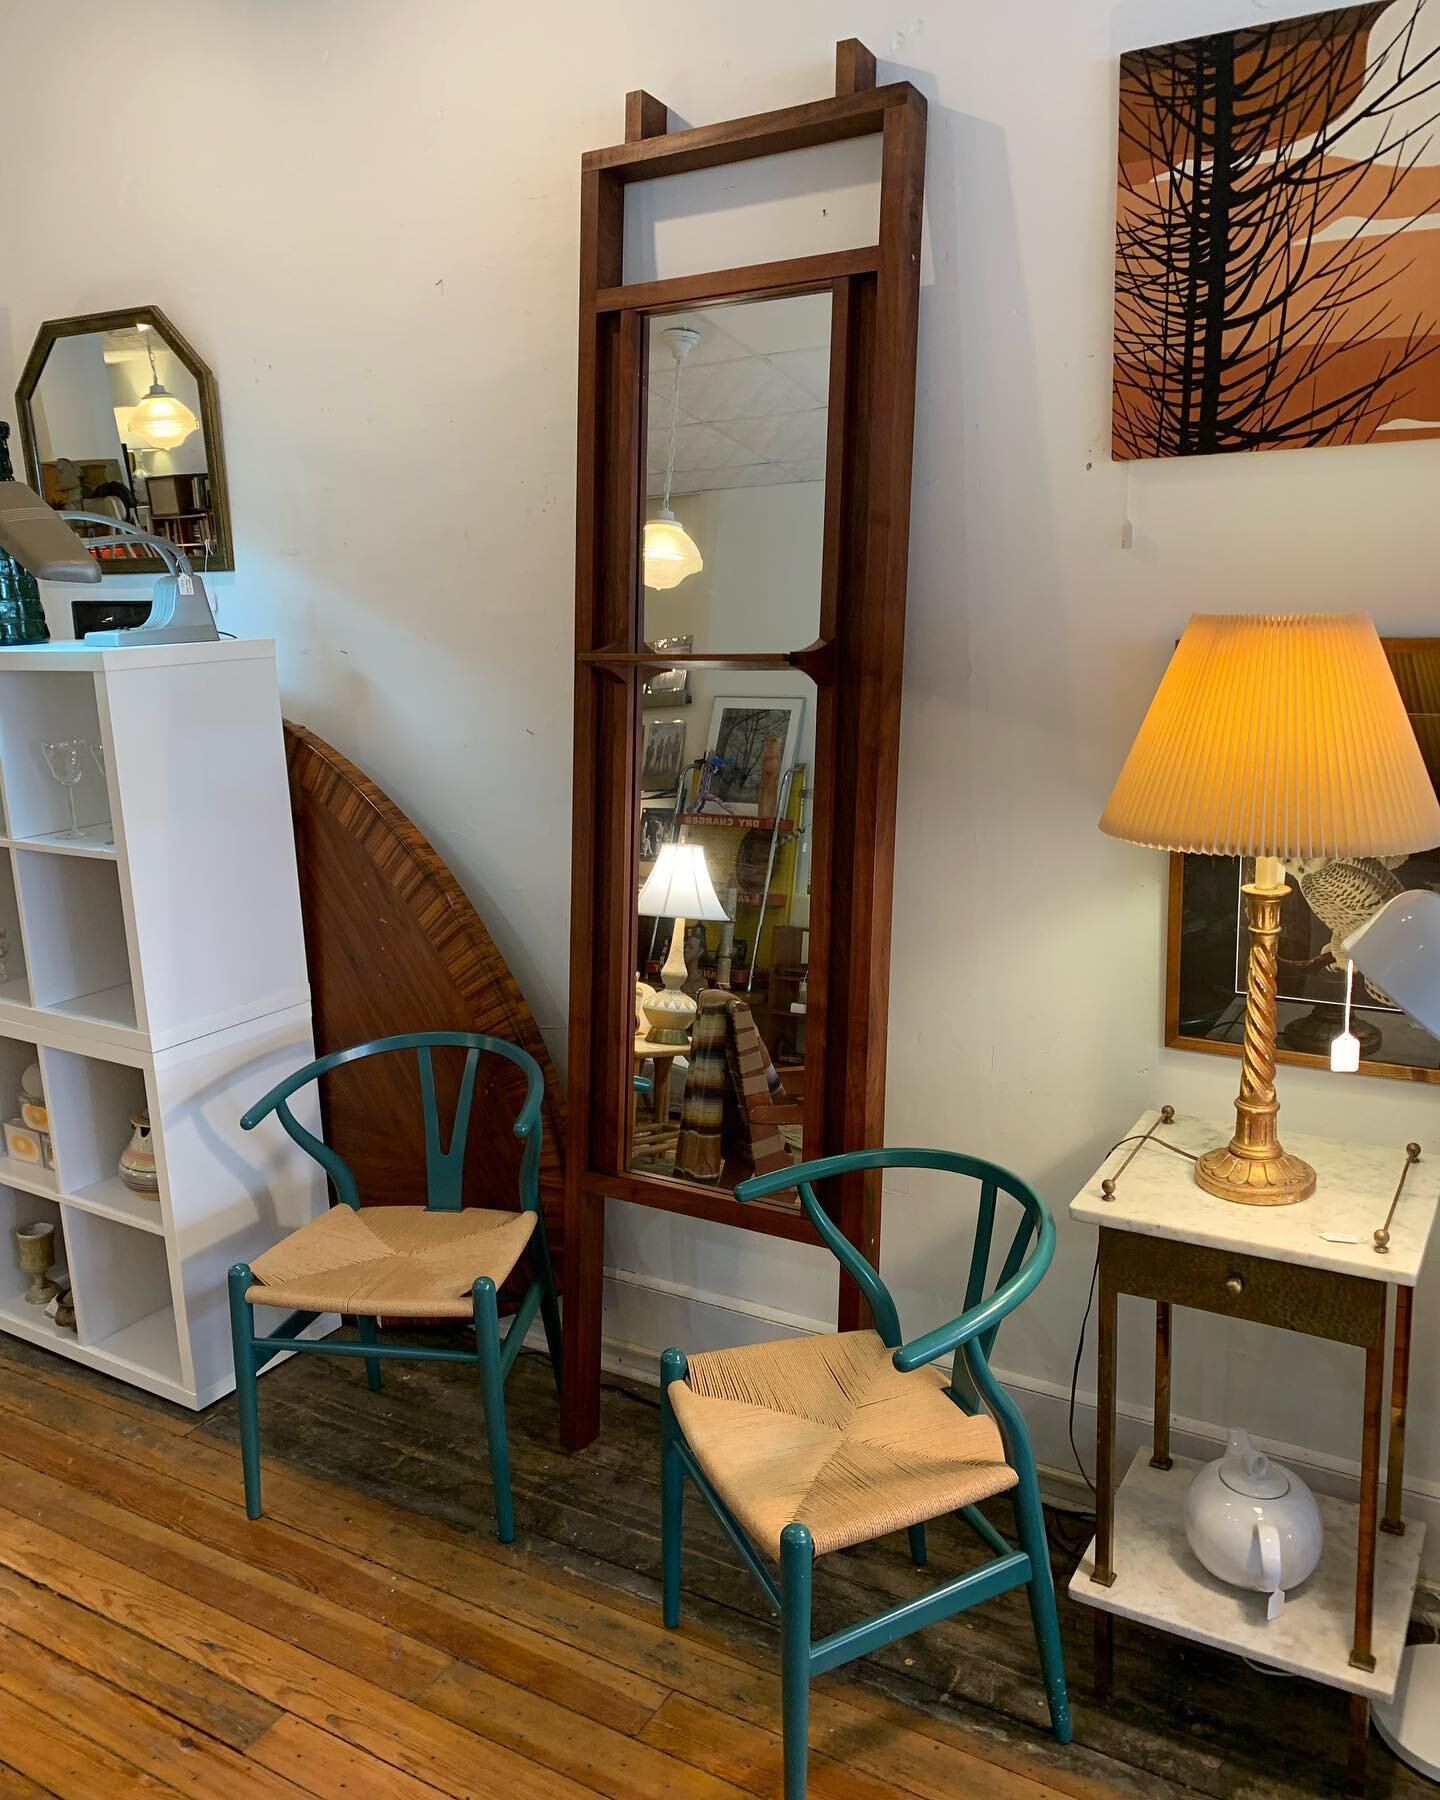 Sold &mdash; Here&rsquo;s a really cool one&mdash;an impressive custom made mirrored room divider in walnut. Finished on both sides (mirror with shelf on one side, solid walnut on reverse). Measures 8&rsquo; tall and 2&rsquo; wide. We didn&rsquo;t ge